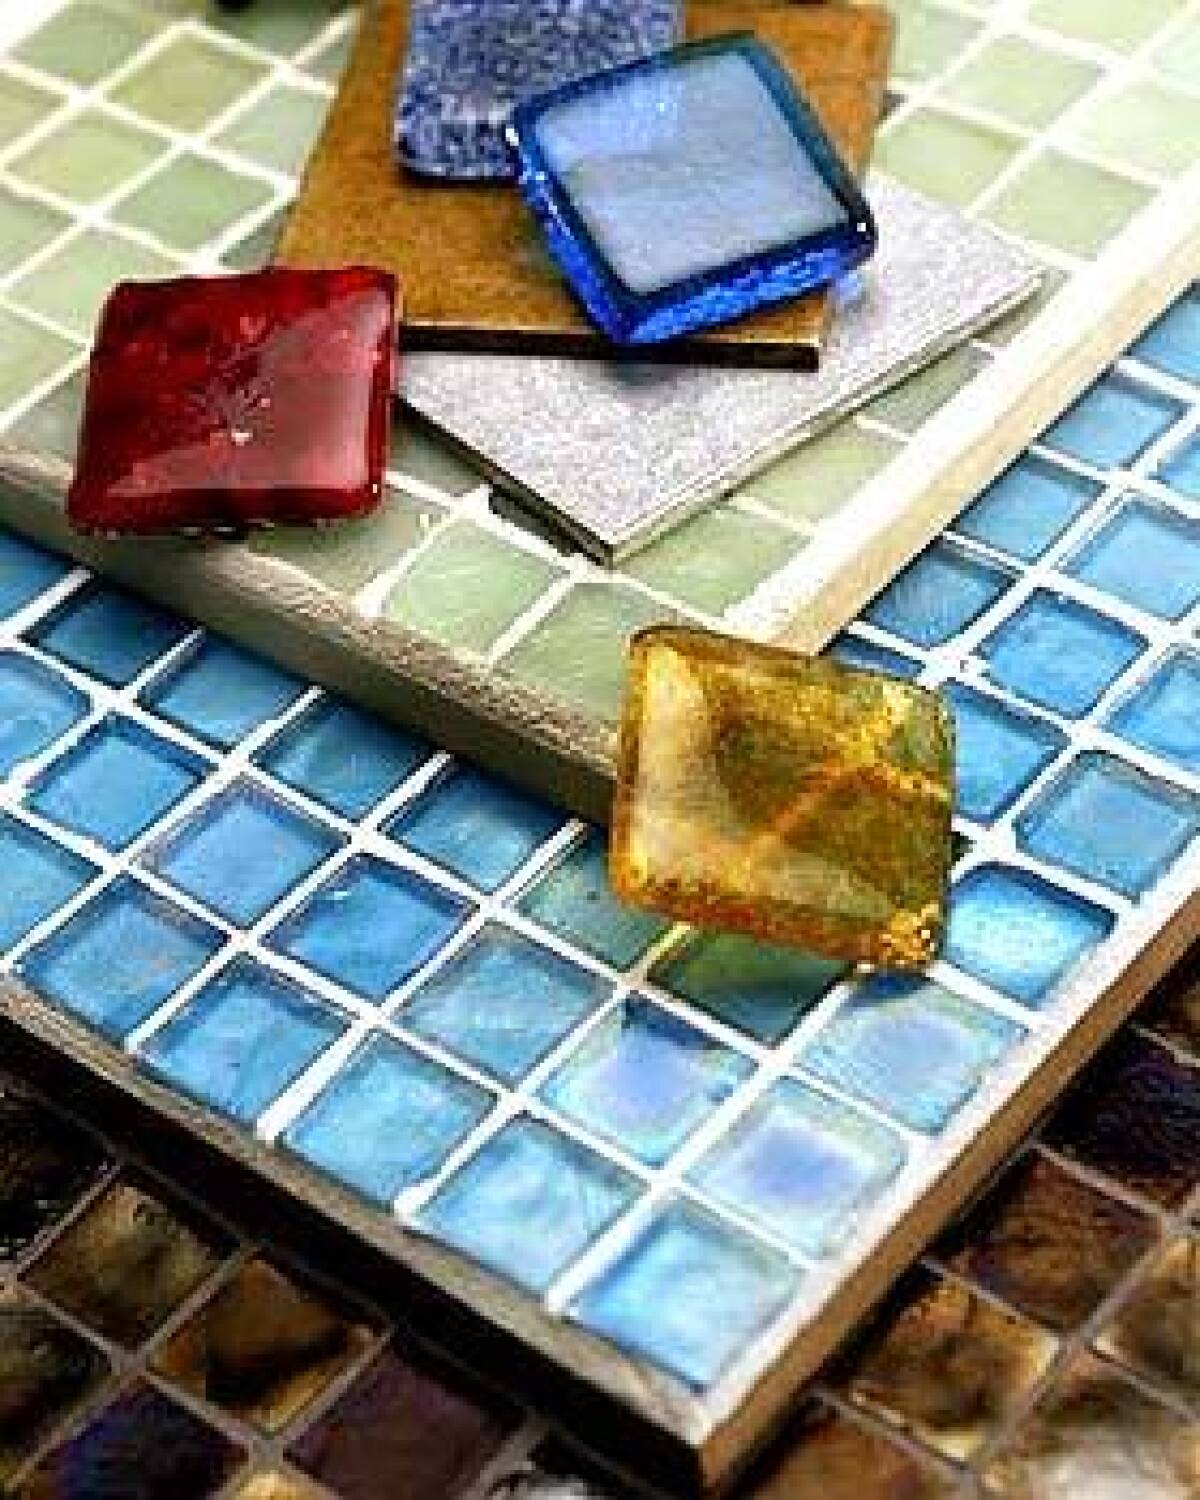 Tiles made from 100% recycled glass in more than 50 colors, from $60 per square foot, are also sold individually as 2-by-2-inch accents, shown here. Four-inch squares of recycled brass, $45, and aluminum, $25 per square foot, come in polished, sandblasted and matte finishes. All from www.ecofriendlyflooring.com, (866) 250-3273. One-inch recycled glass Tessera mosaic tiles in Midori green, aqua and bronze iridescent finishes, from $28 per square foot. For dealers, go to www.glasstile.com or call (866) 648-8453.